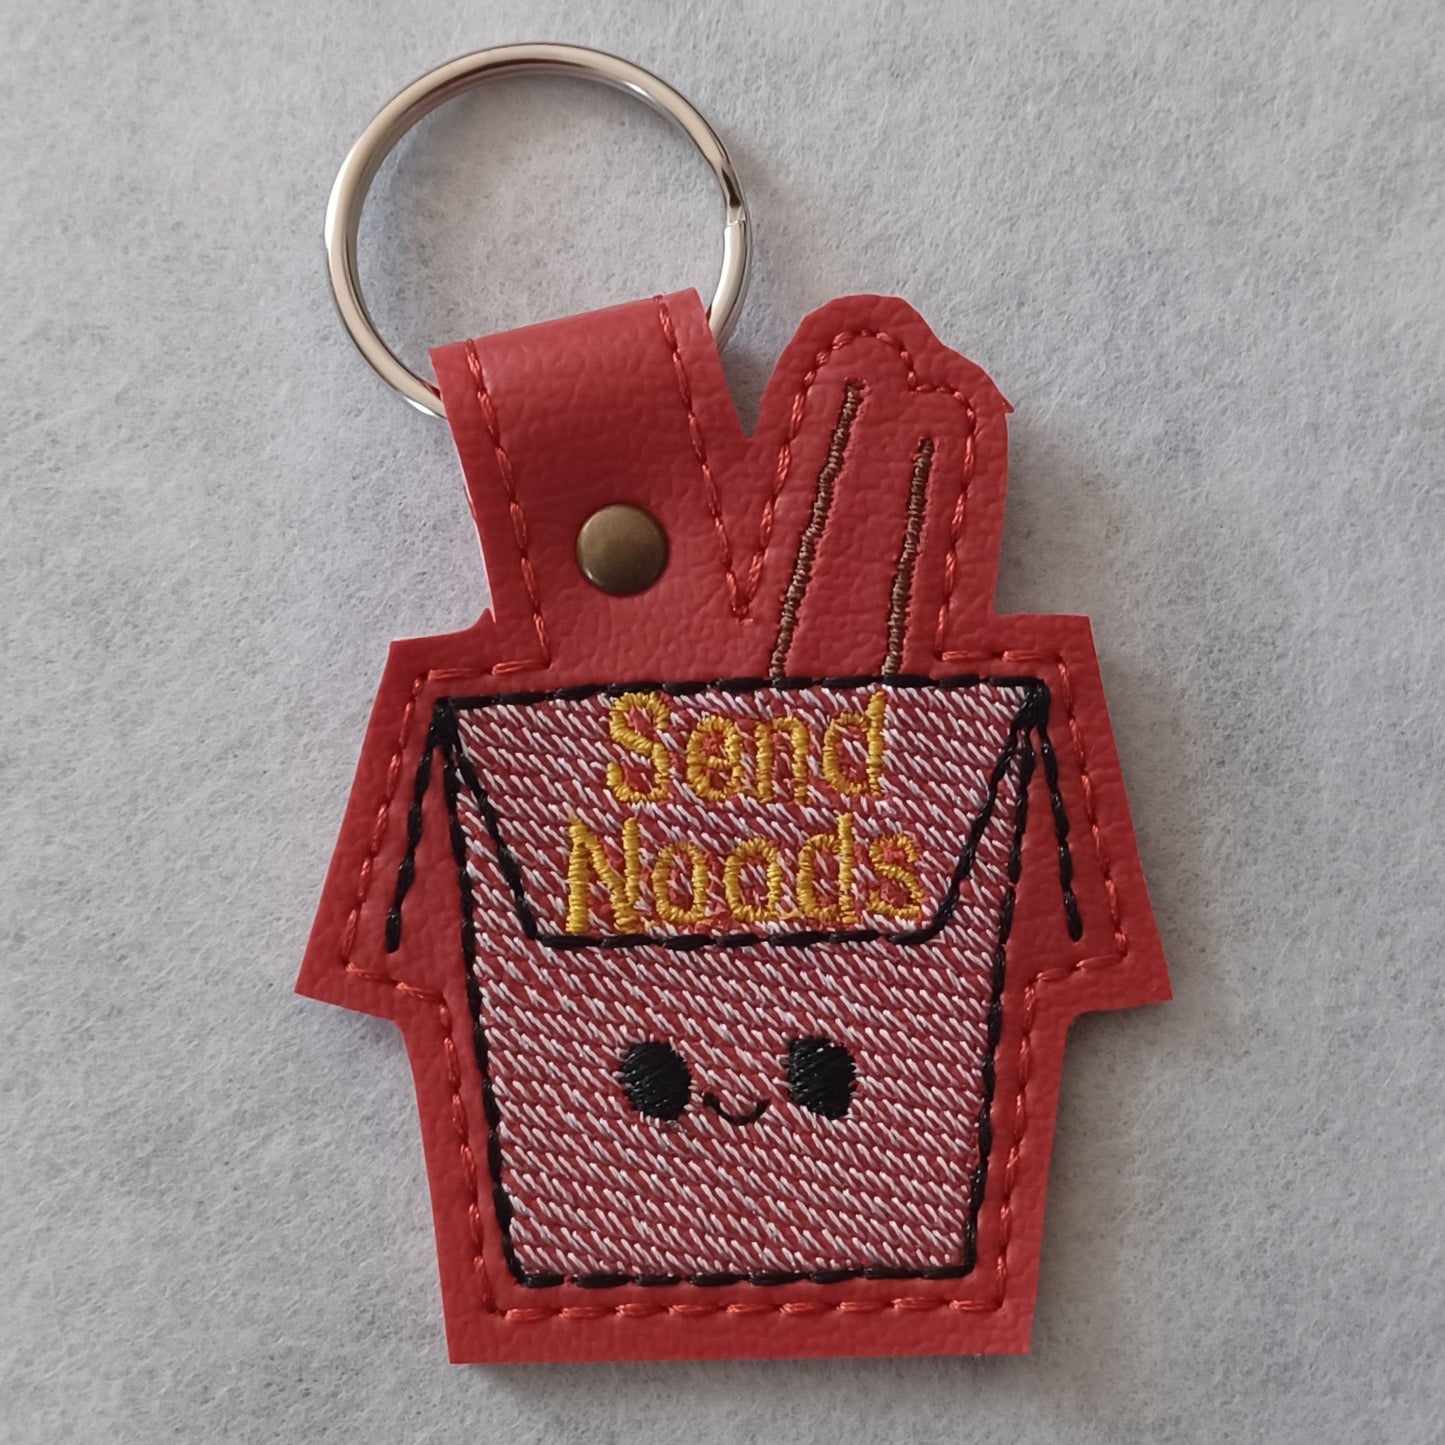 Takeout Box "Send Noods" Embroidered Vinyl Key Ring